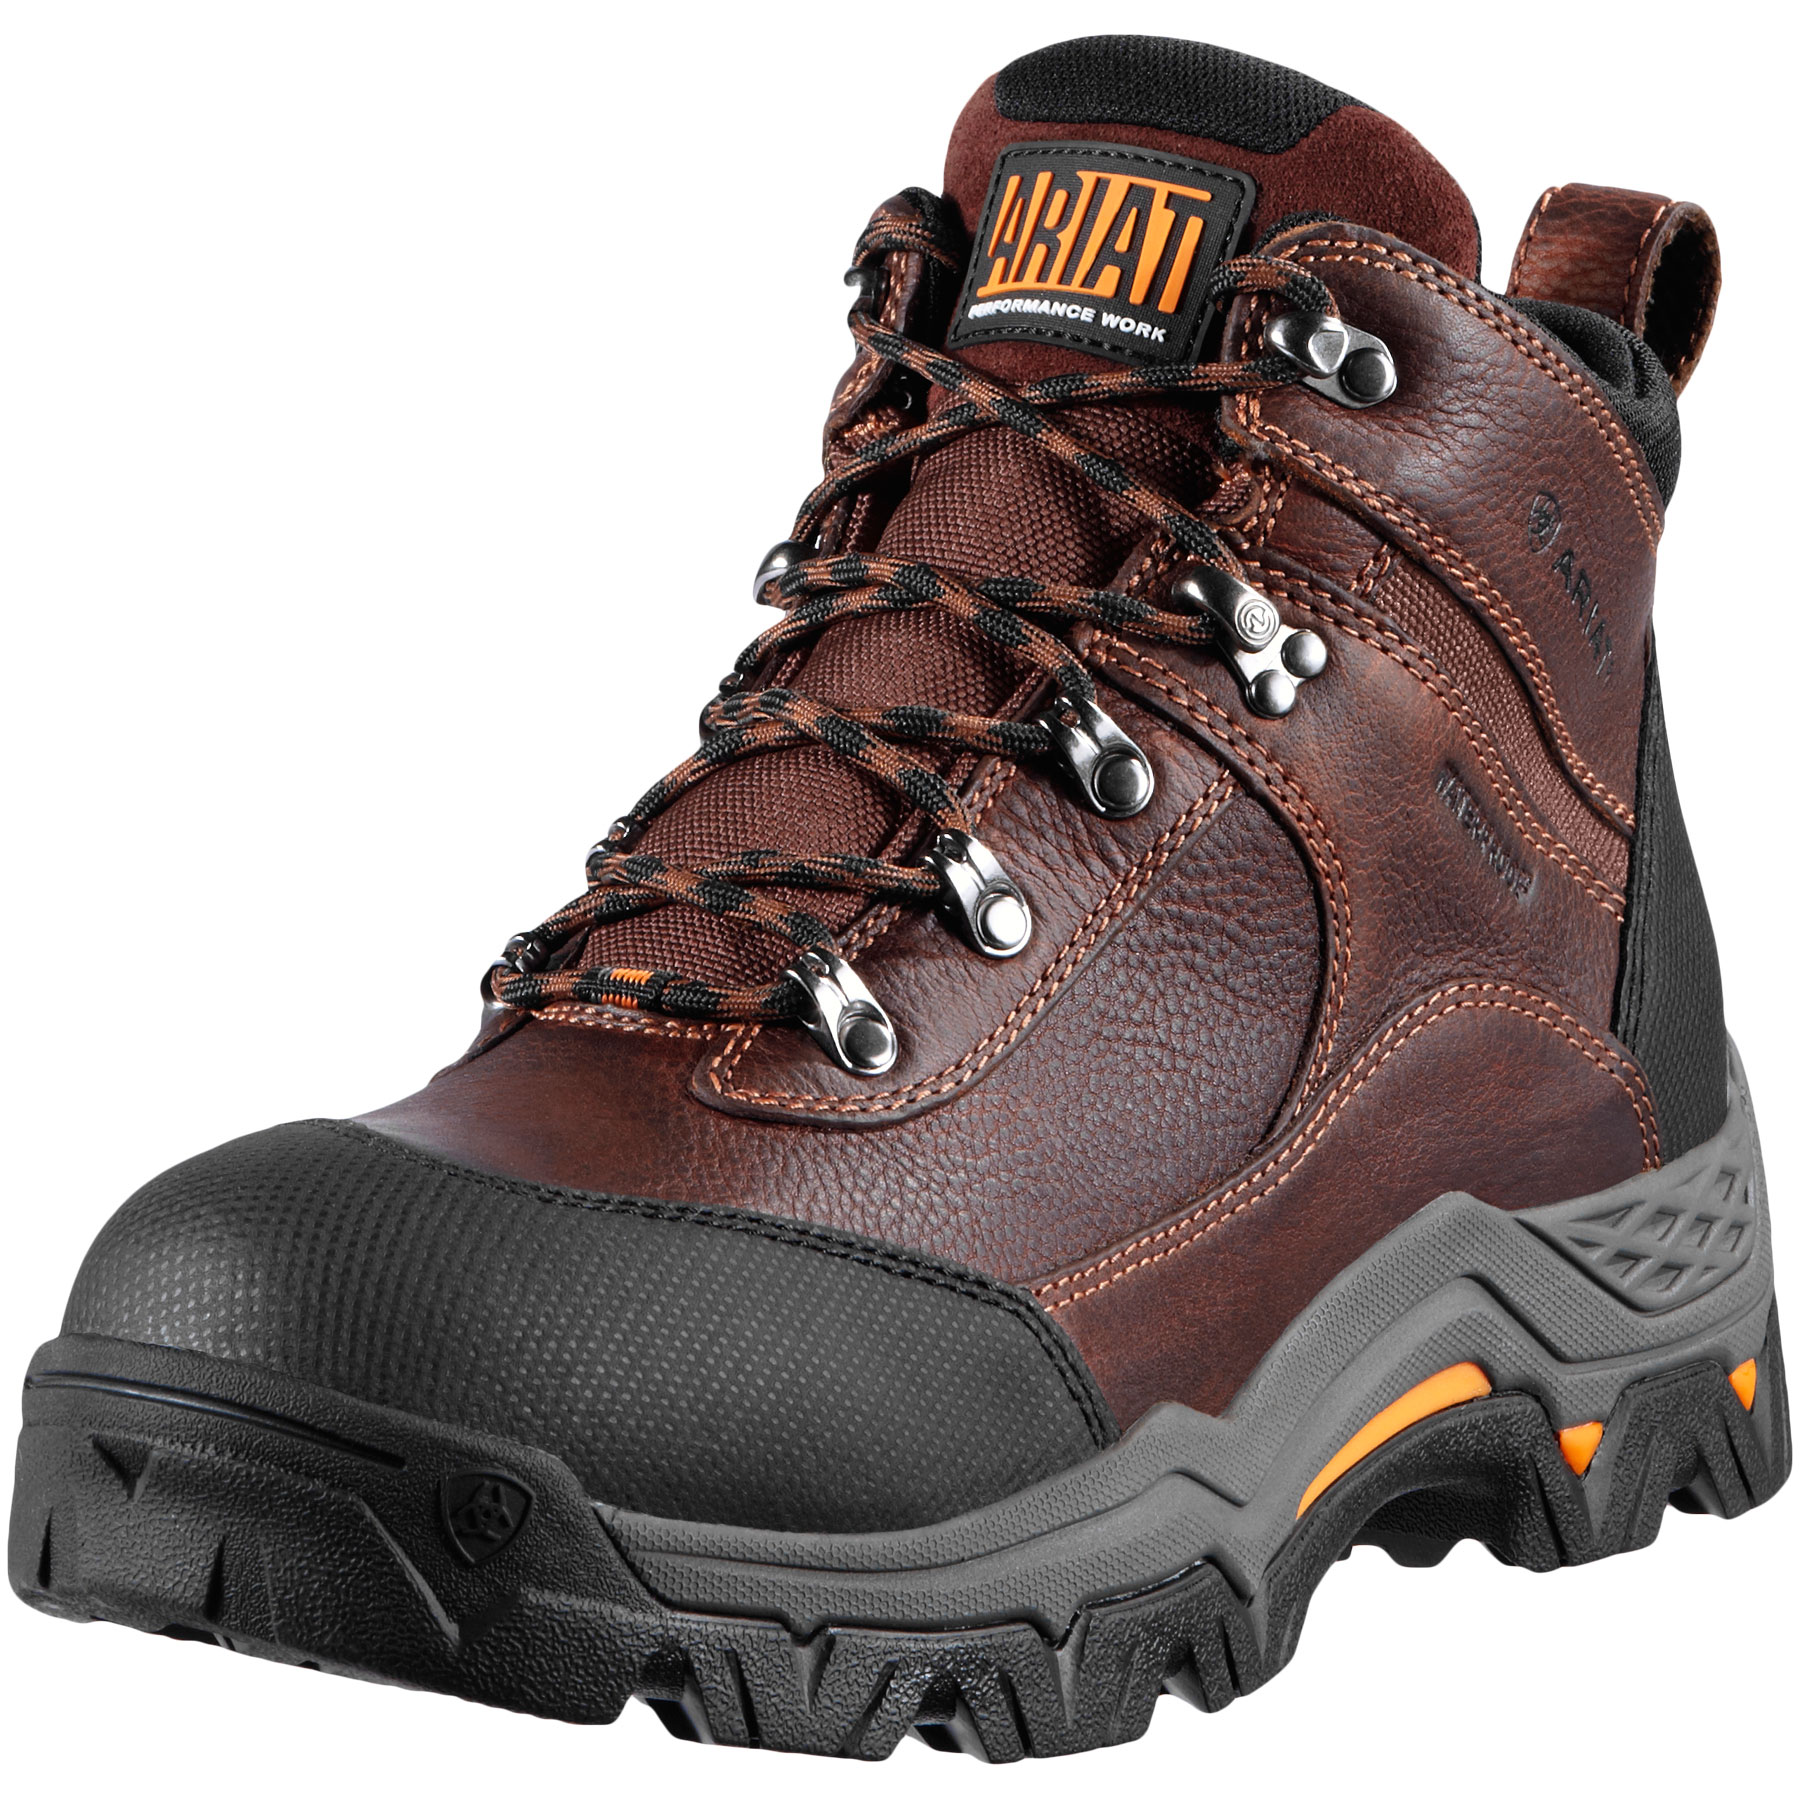 ariat h2o work boots